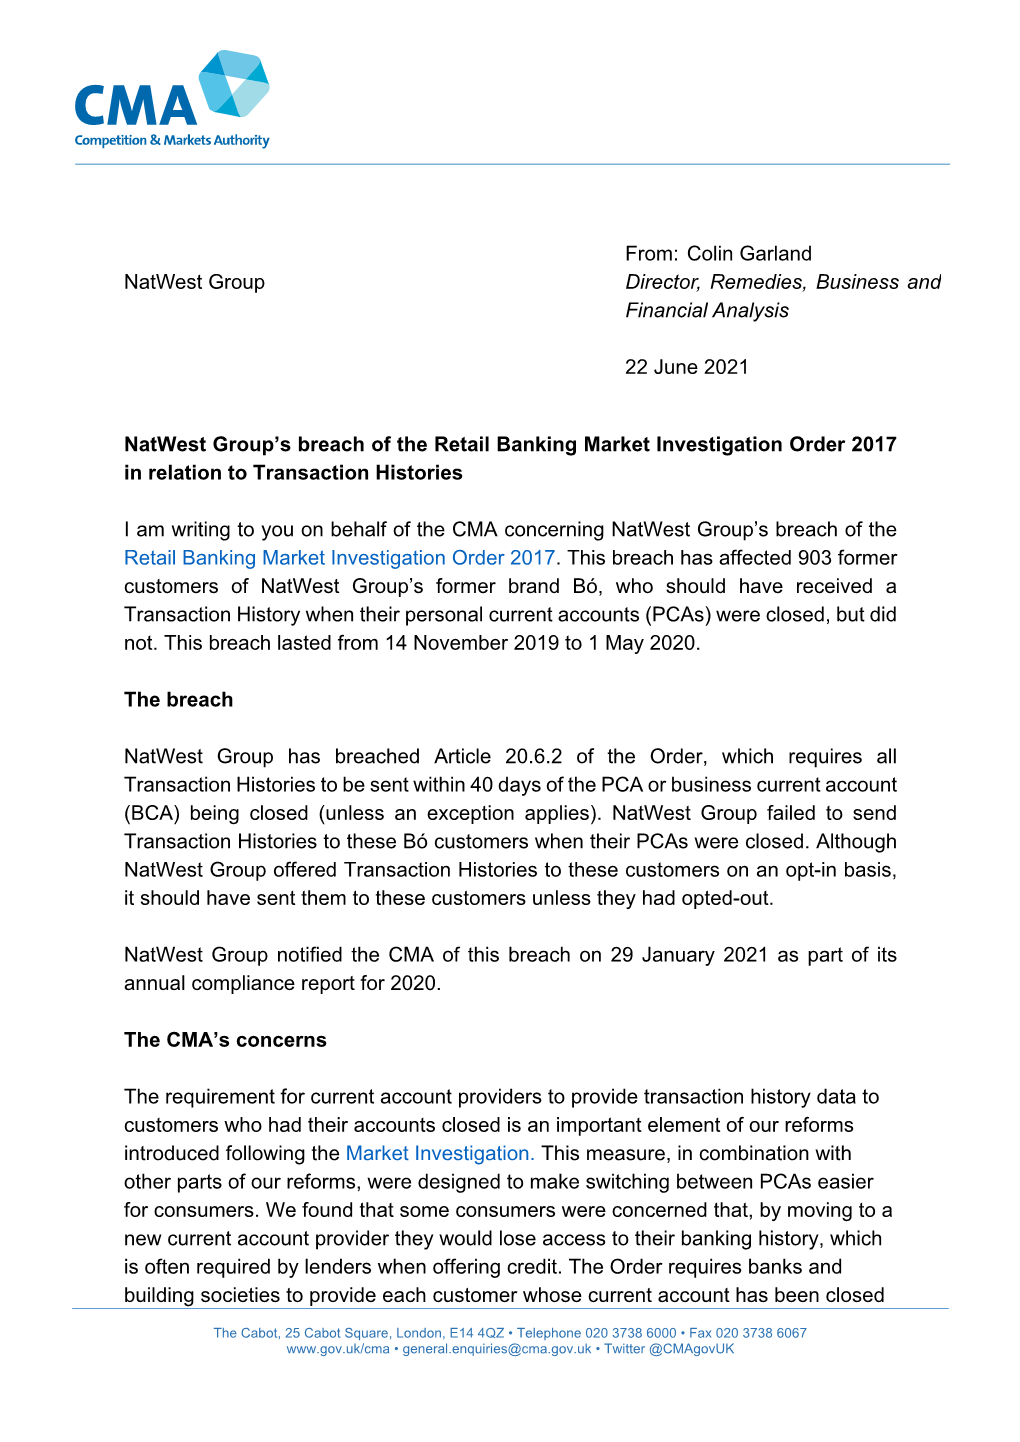 CMA Letter to Natwest on a Breach of the Retail Banking Order